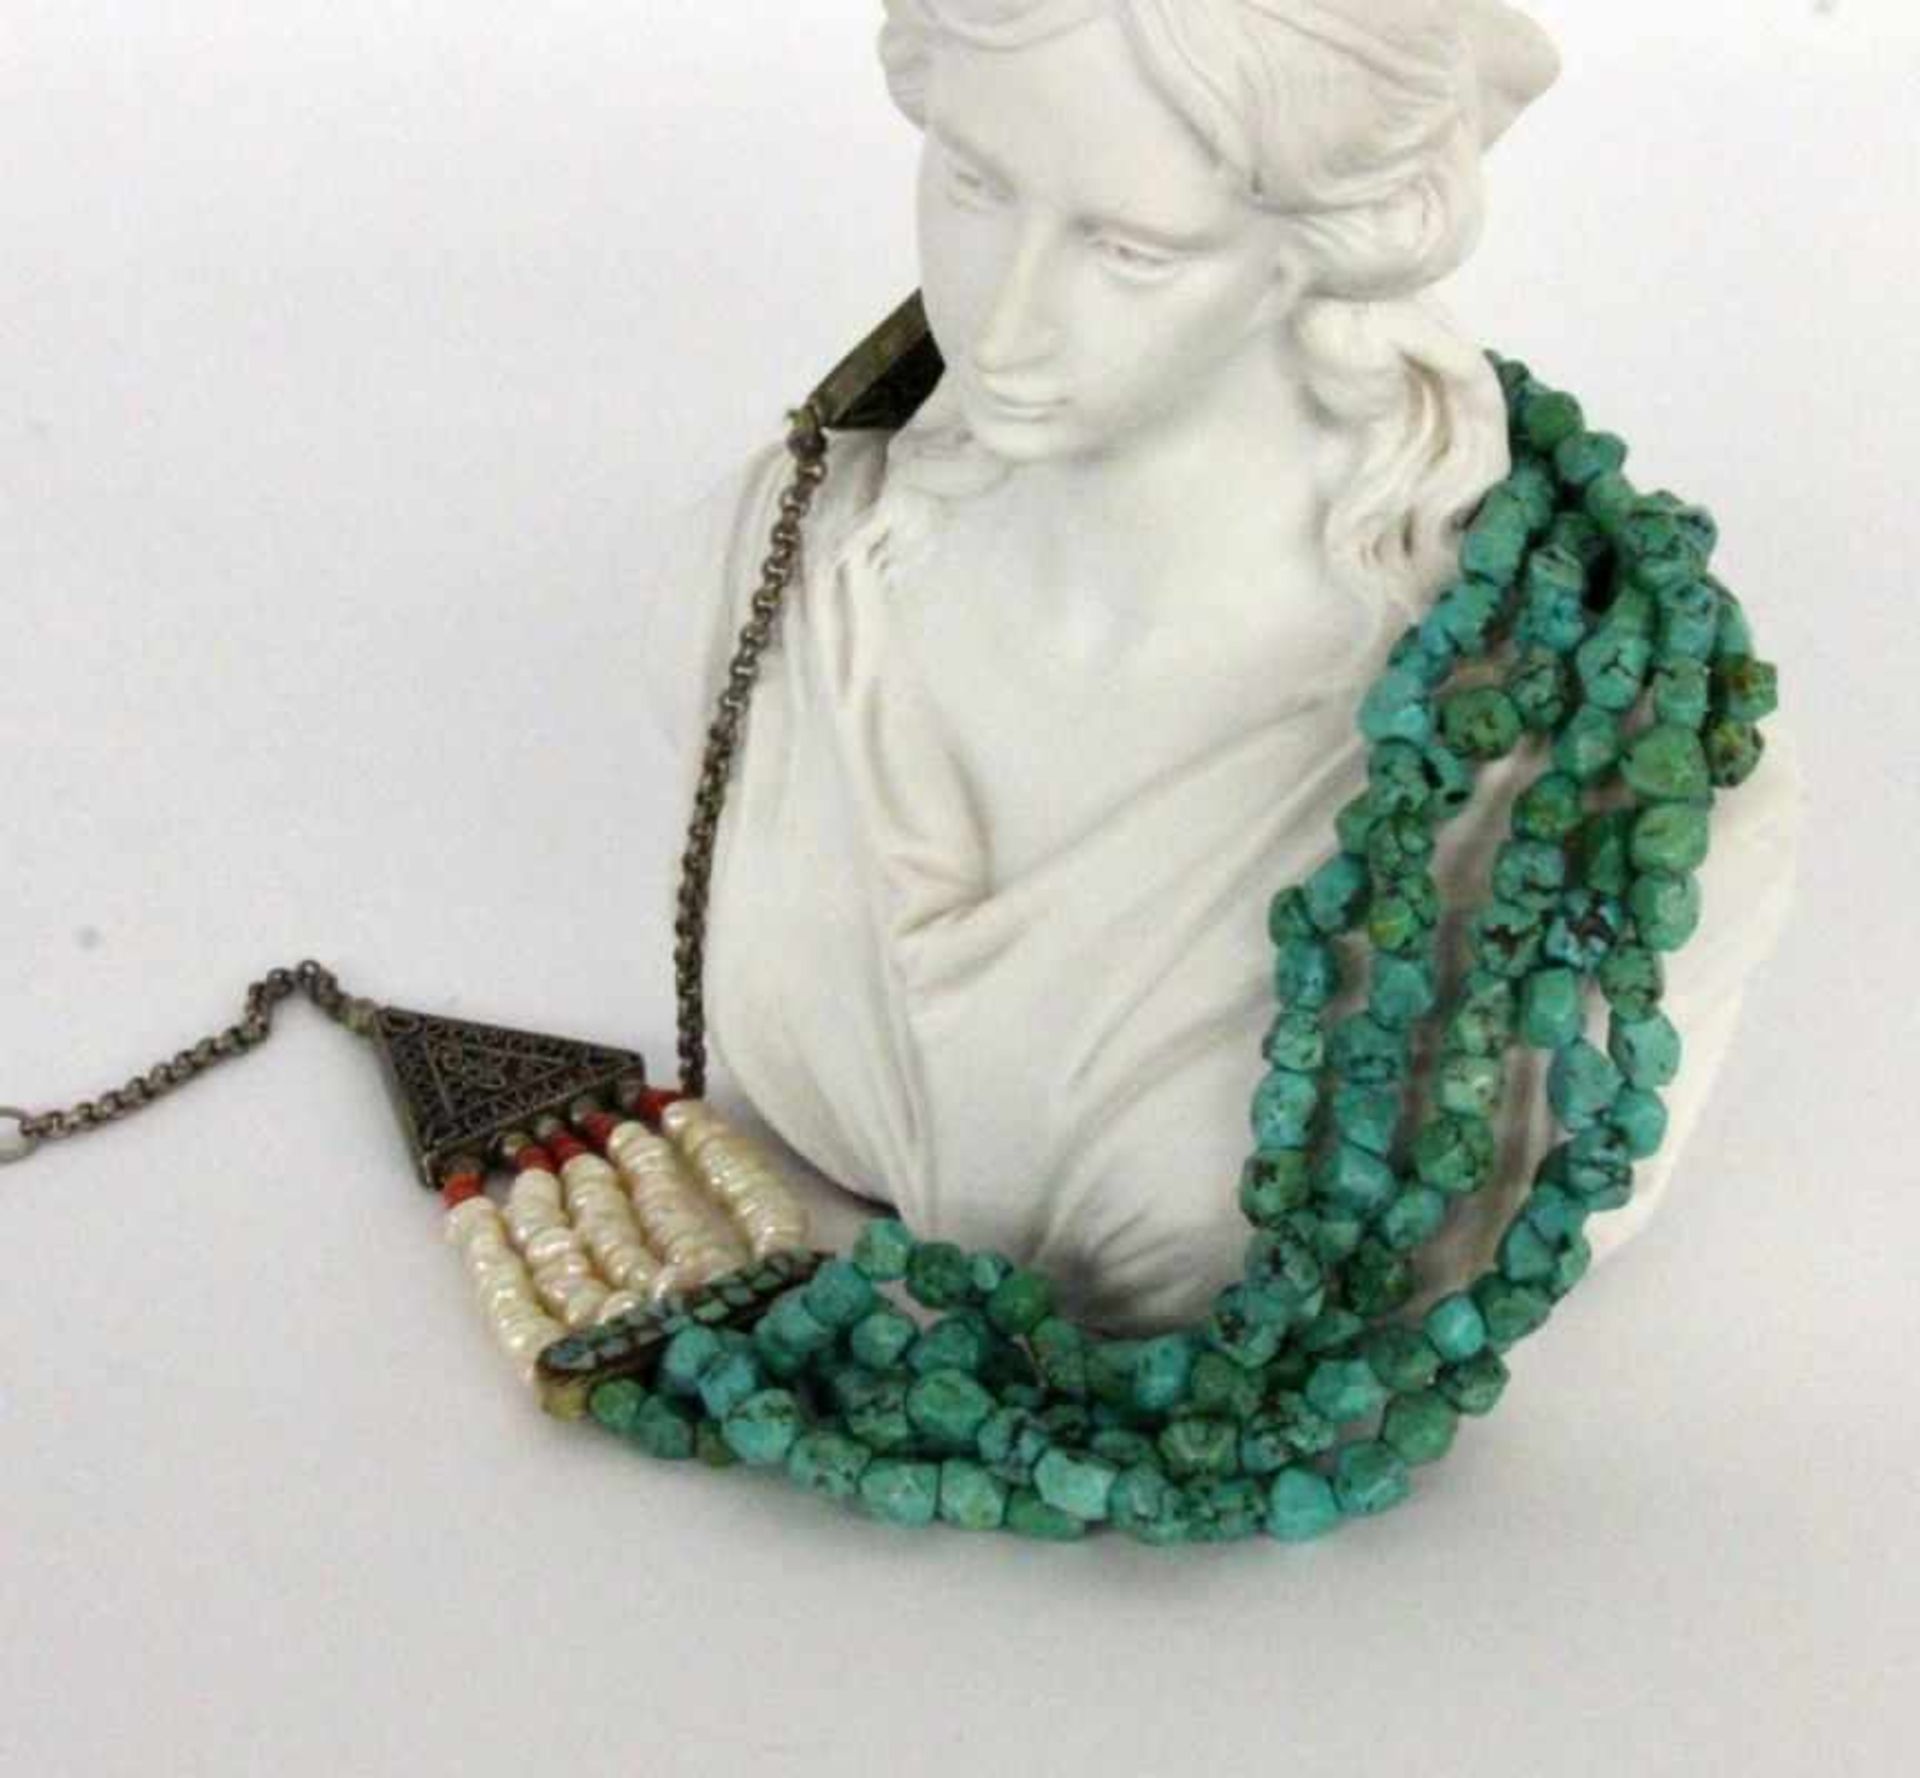 AN ORIENTAL WEDDING NECKLACE Silver with turquoise, pearls and corals, 40 cm long.ORIENTALISCHE